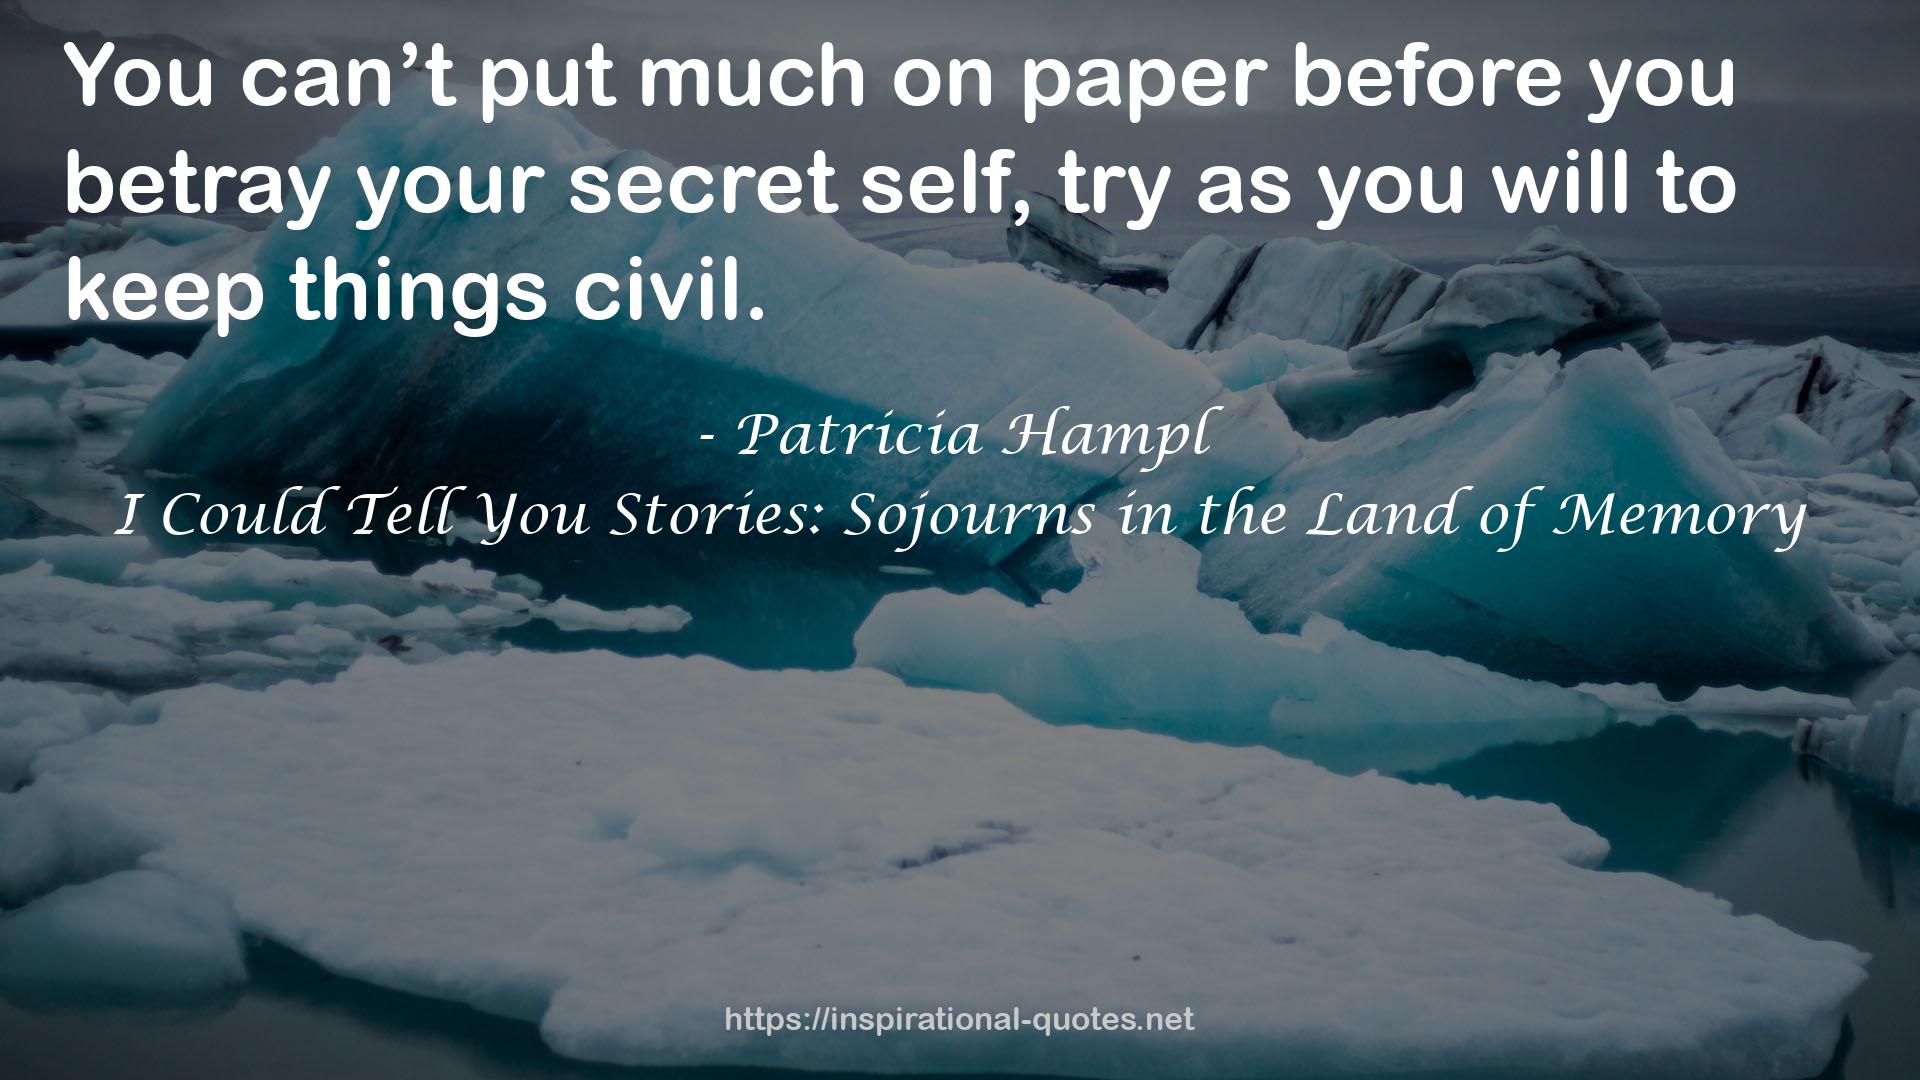 I Could Tell You Stories: Sojourns in the Land of Memory QUOTES